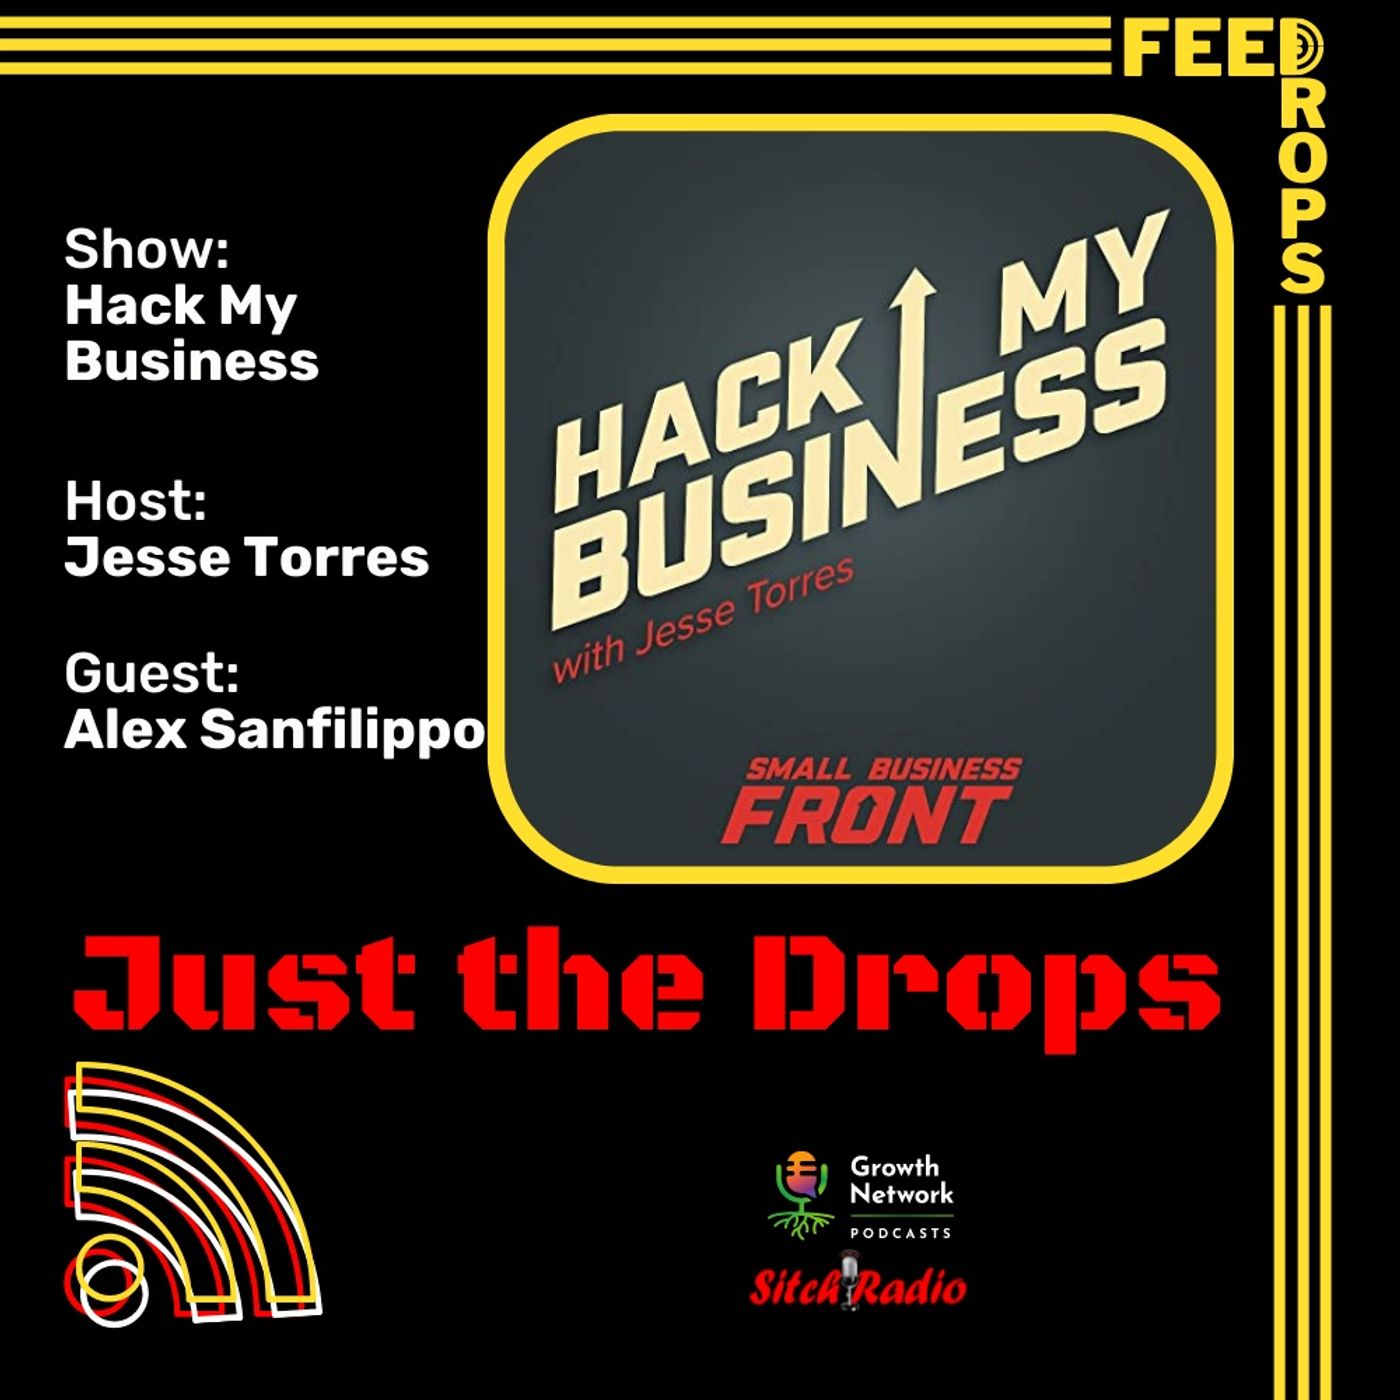 Feed Drop: Hack My Business